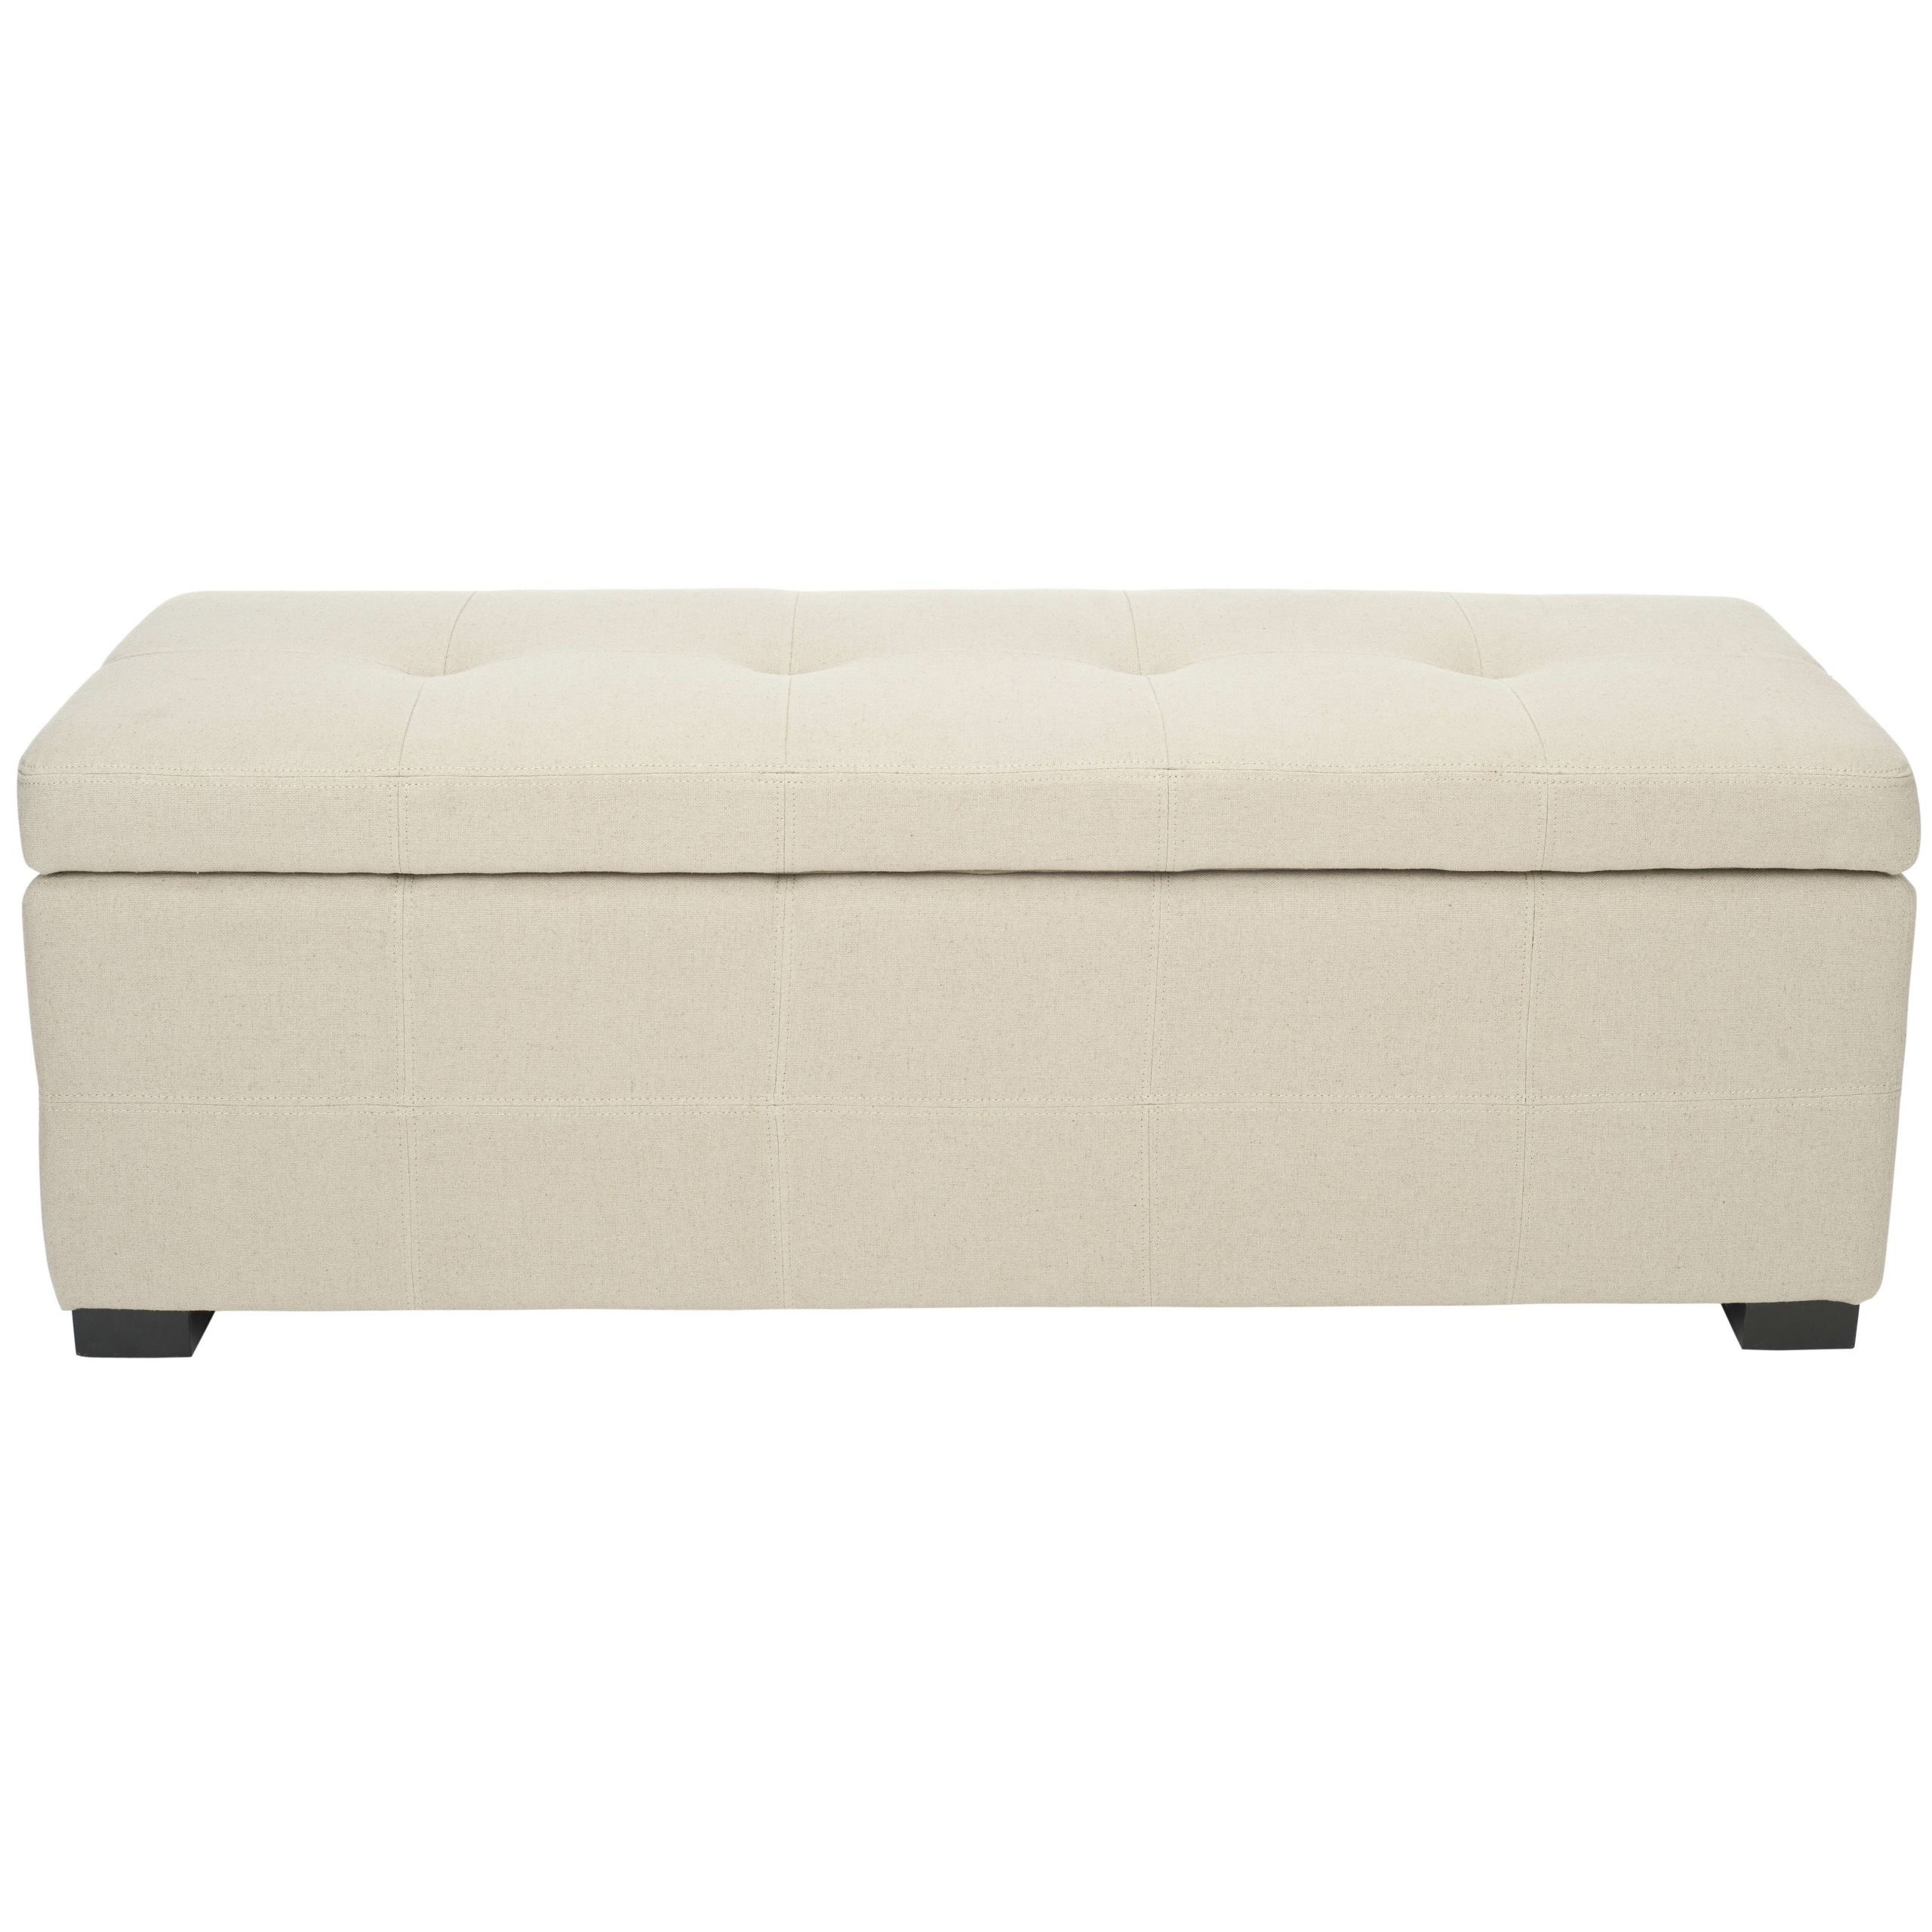 Storage Ottoman For Bedroom
 Darby Home Co Henrickson Wood Storage Bedroom Bench